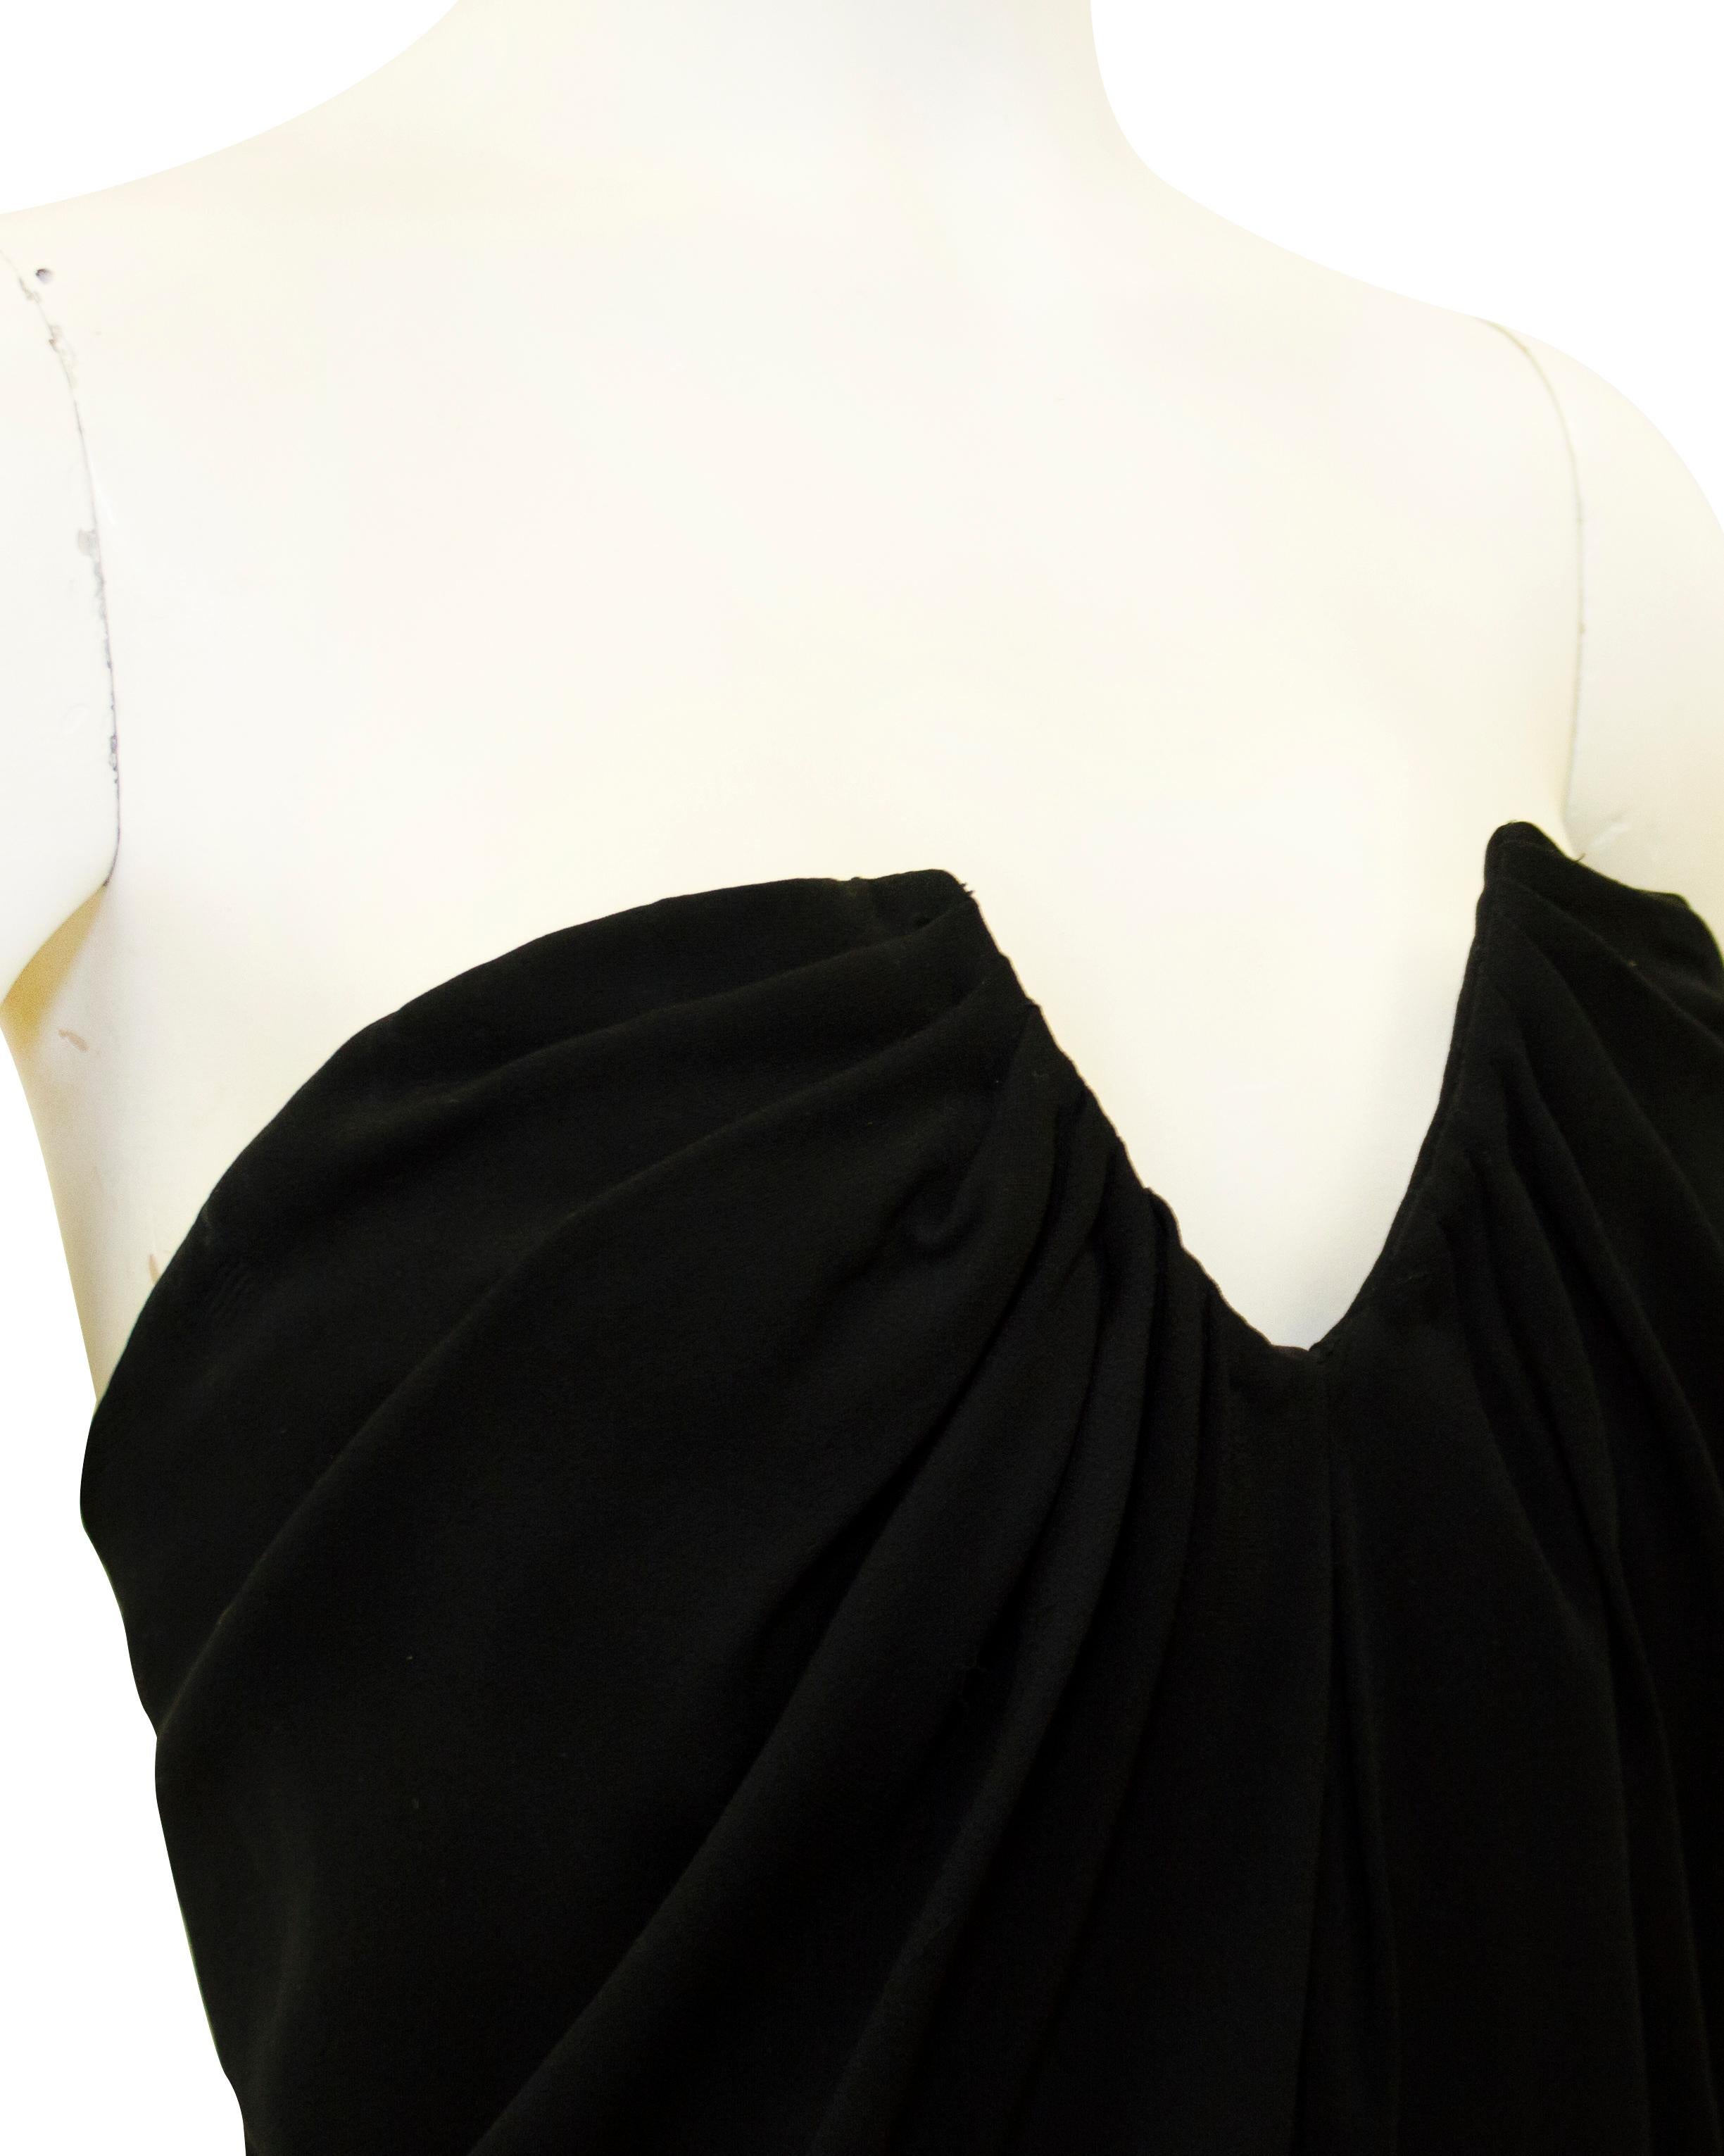 1980s Carolyne Roehm Black Strapless Gown  In Good Condition For Sale In Toronto, Ontario